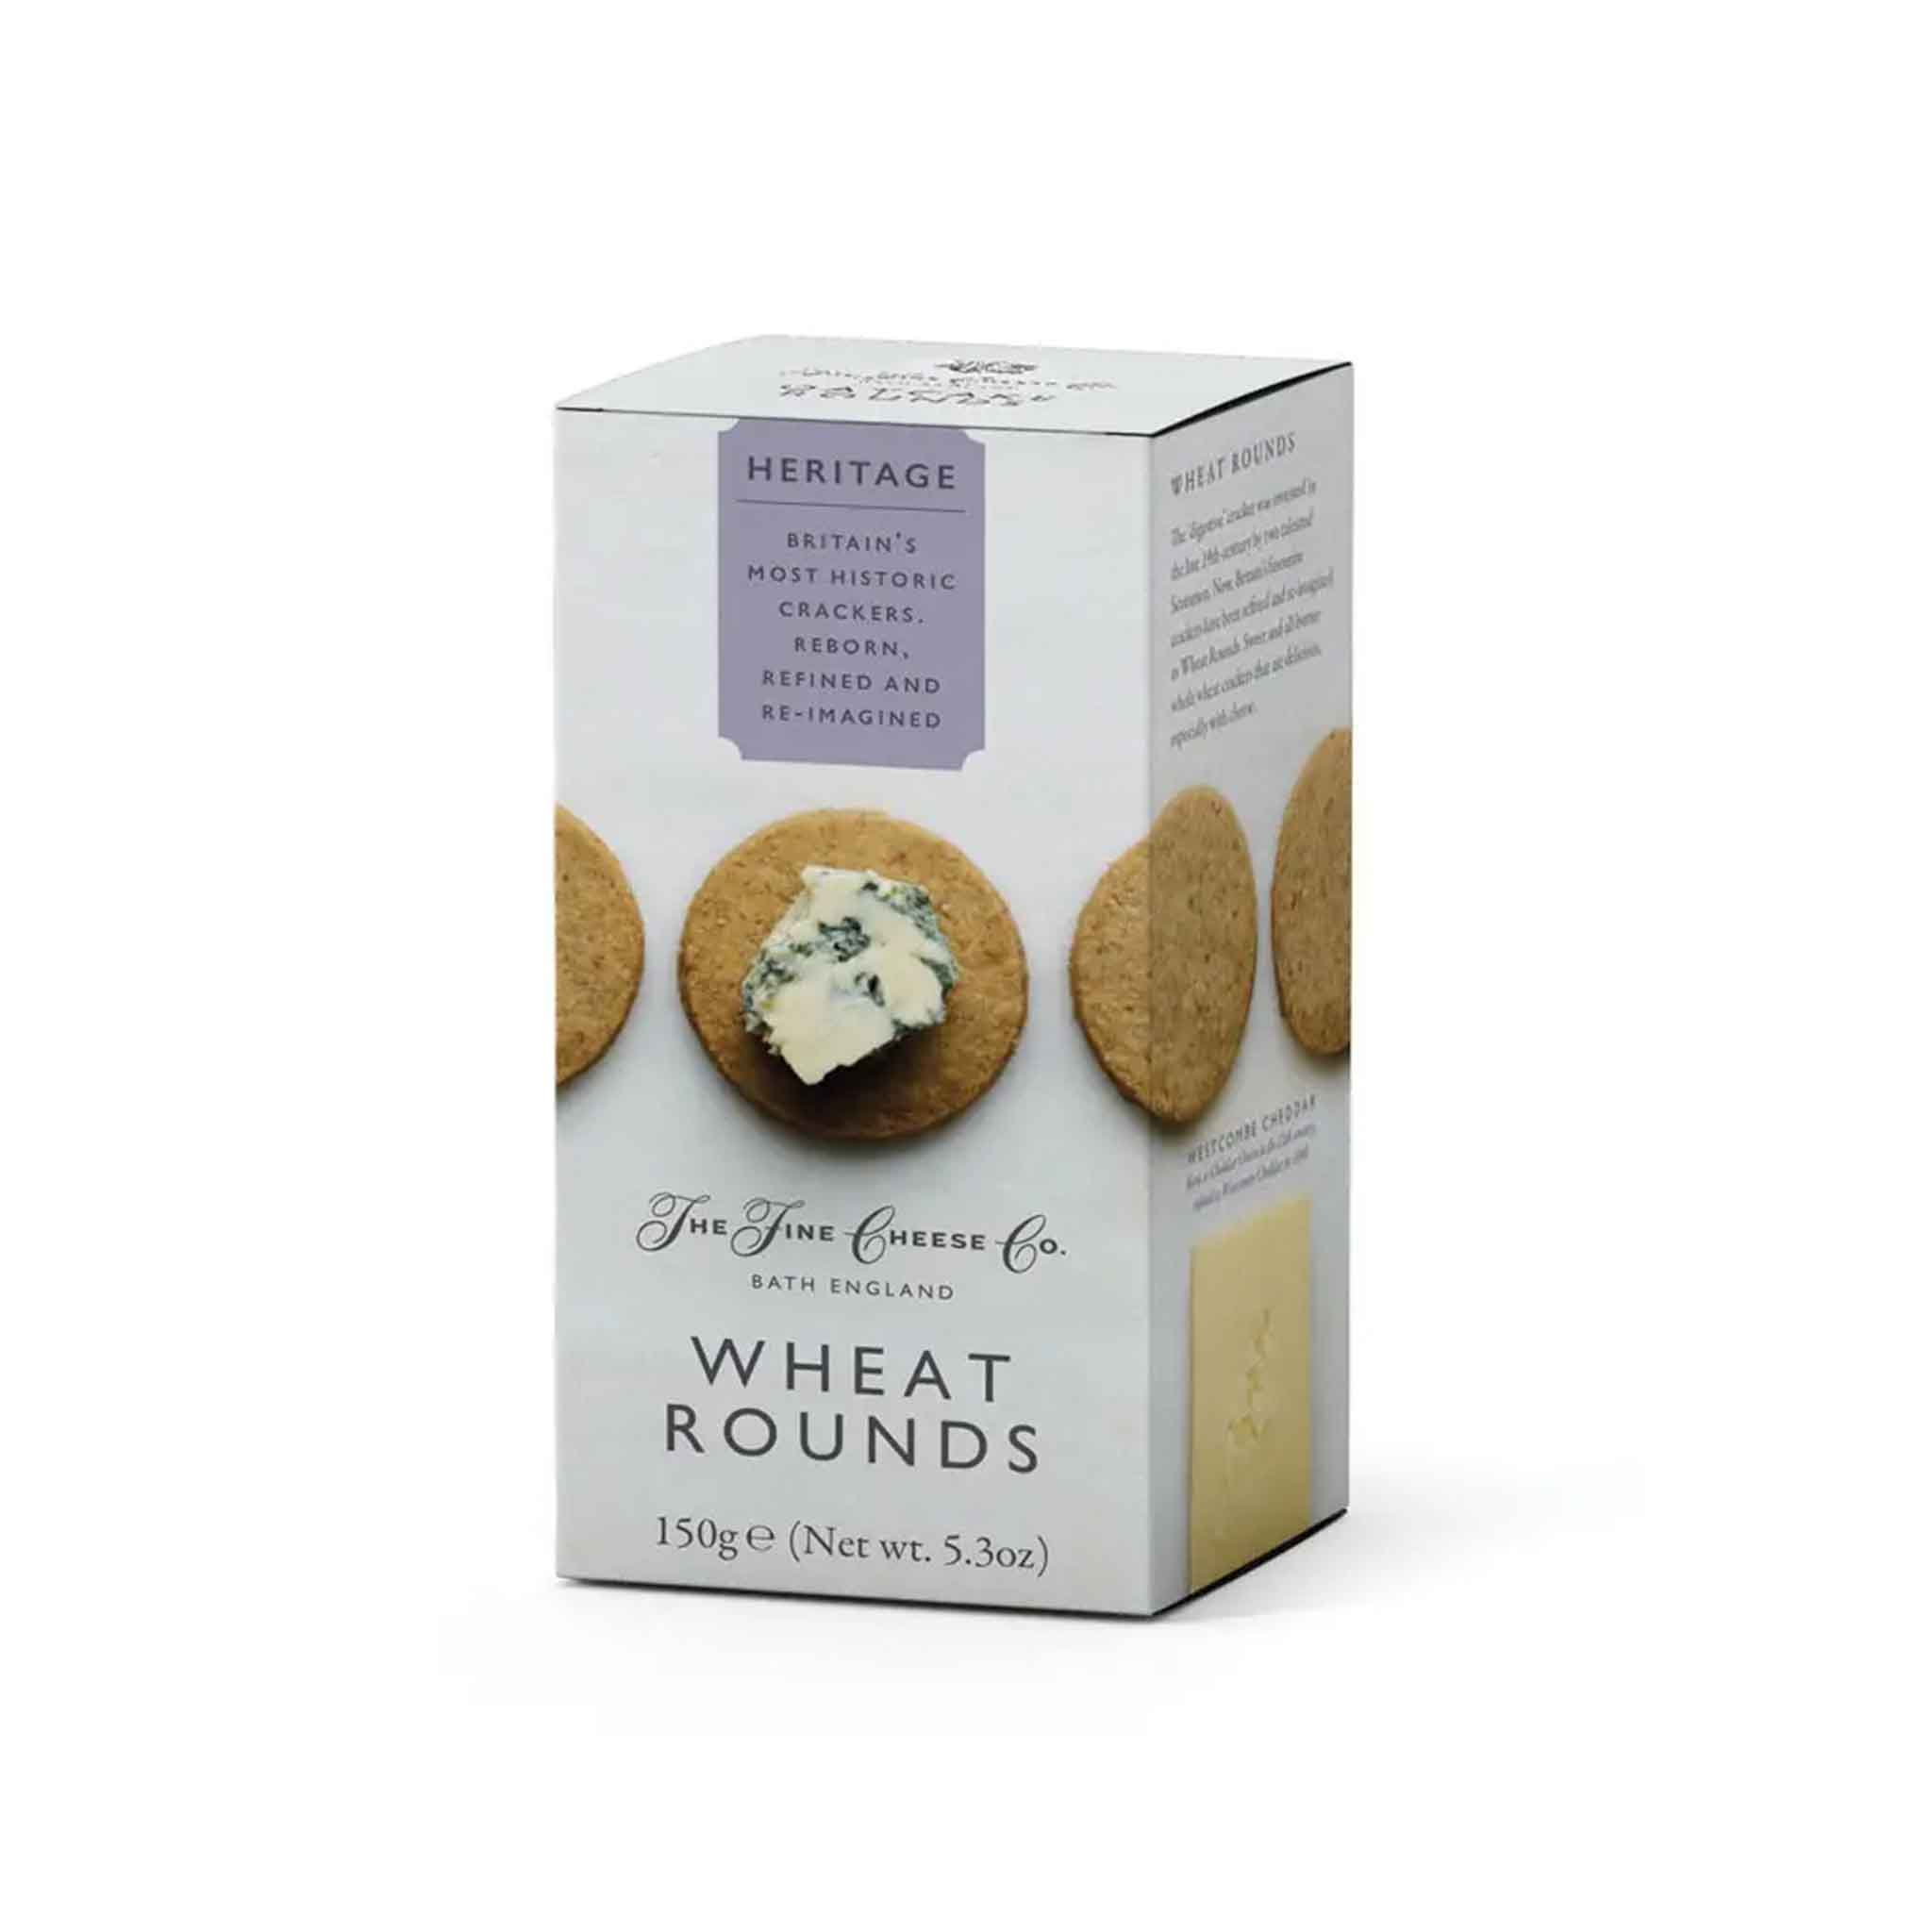 THE FINE CHEESE COMPANY WHEAT ROUNDS CRACKERS 150g